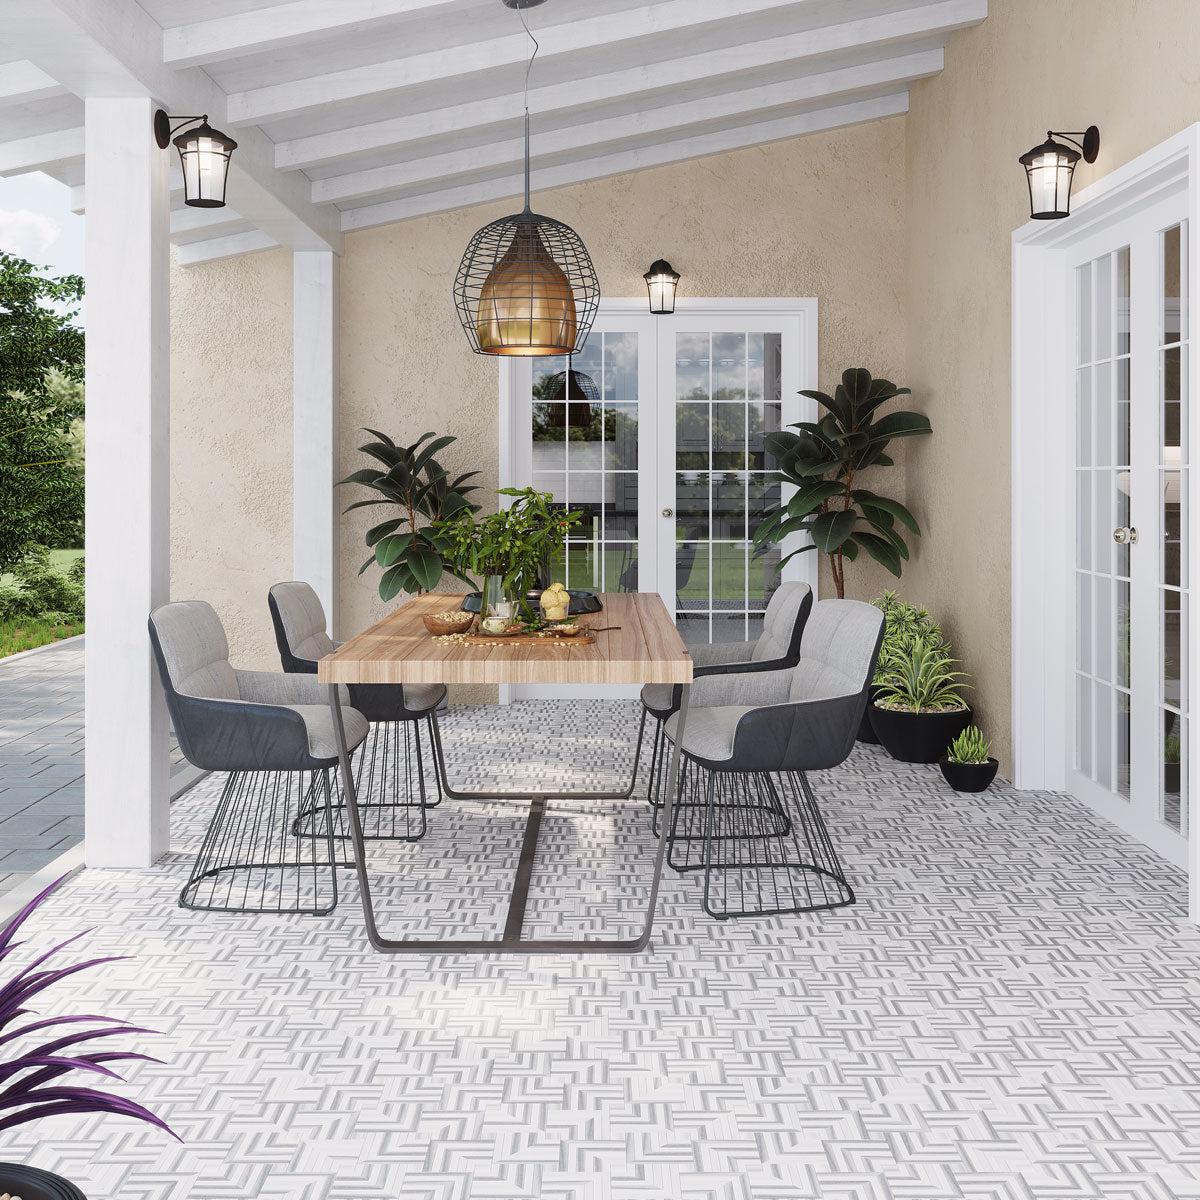 Outdoor Living Area with Square Weave Equator & Thassos Polished Mosaic Floor Tile for a Patterned Patio